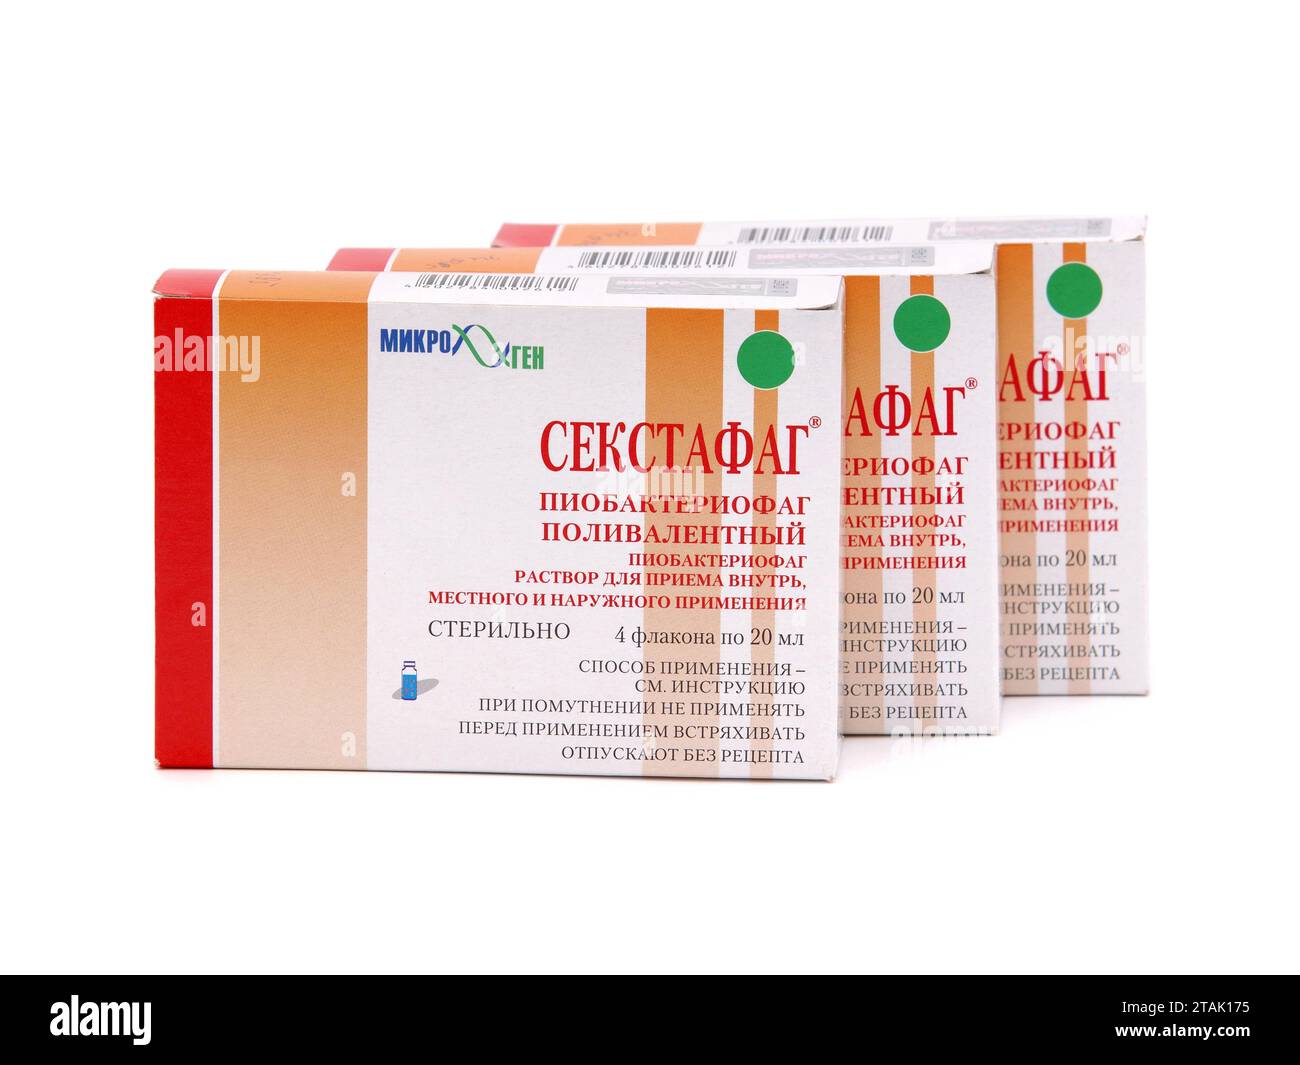 BUCHAREST, ROMANIA - MARCH 17, 2020. Sextafag piobacteriofag polyvalent, packs of four 20 ml vials, solution for external and oral use with antibacter Stock Photo